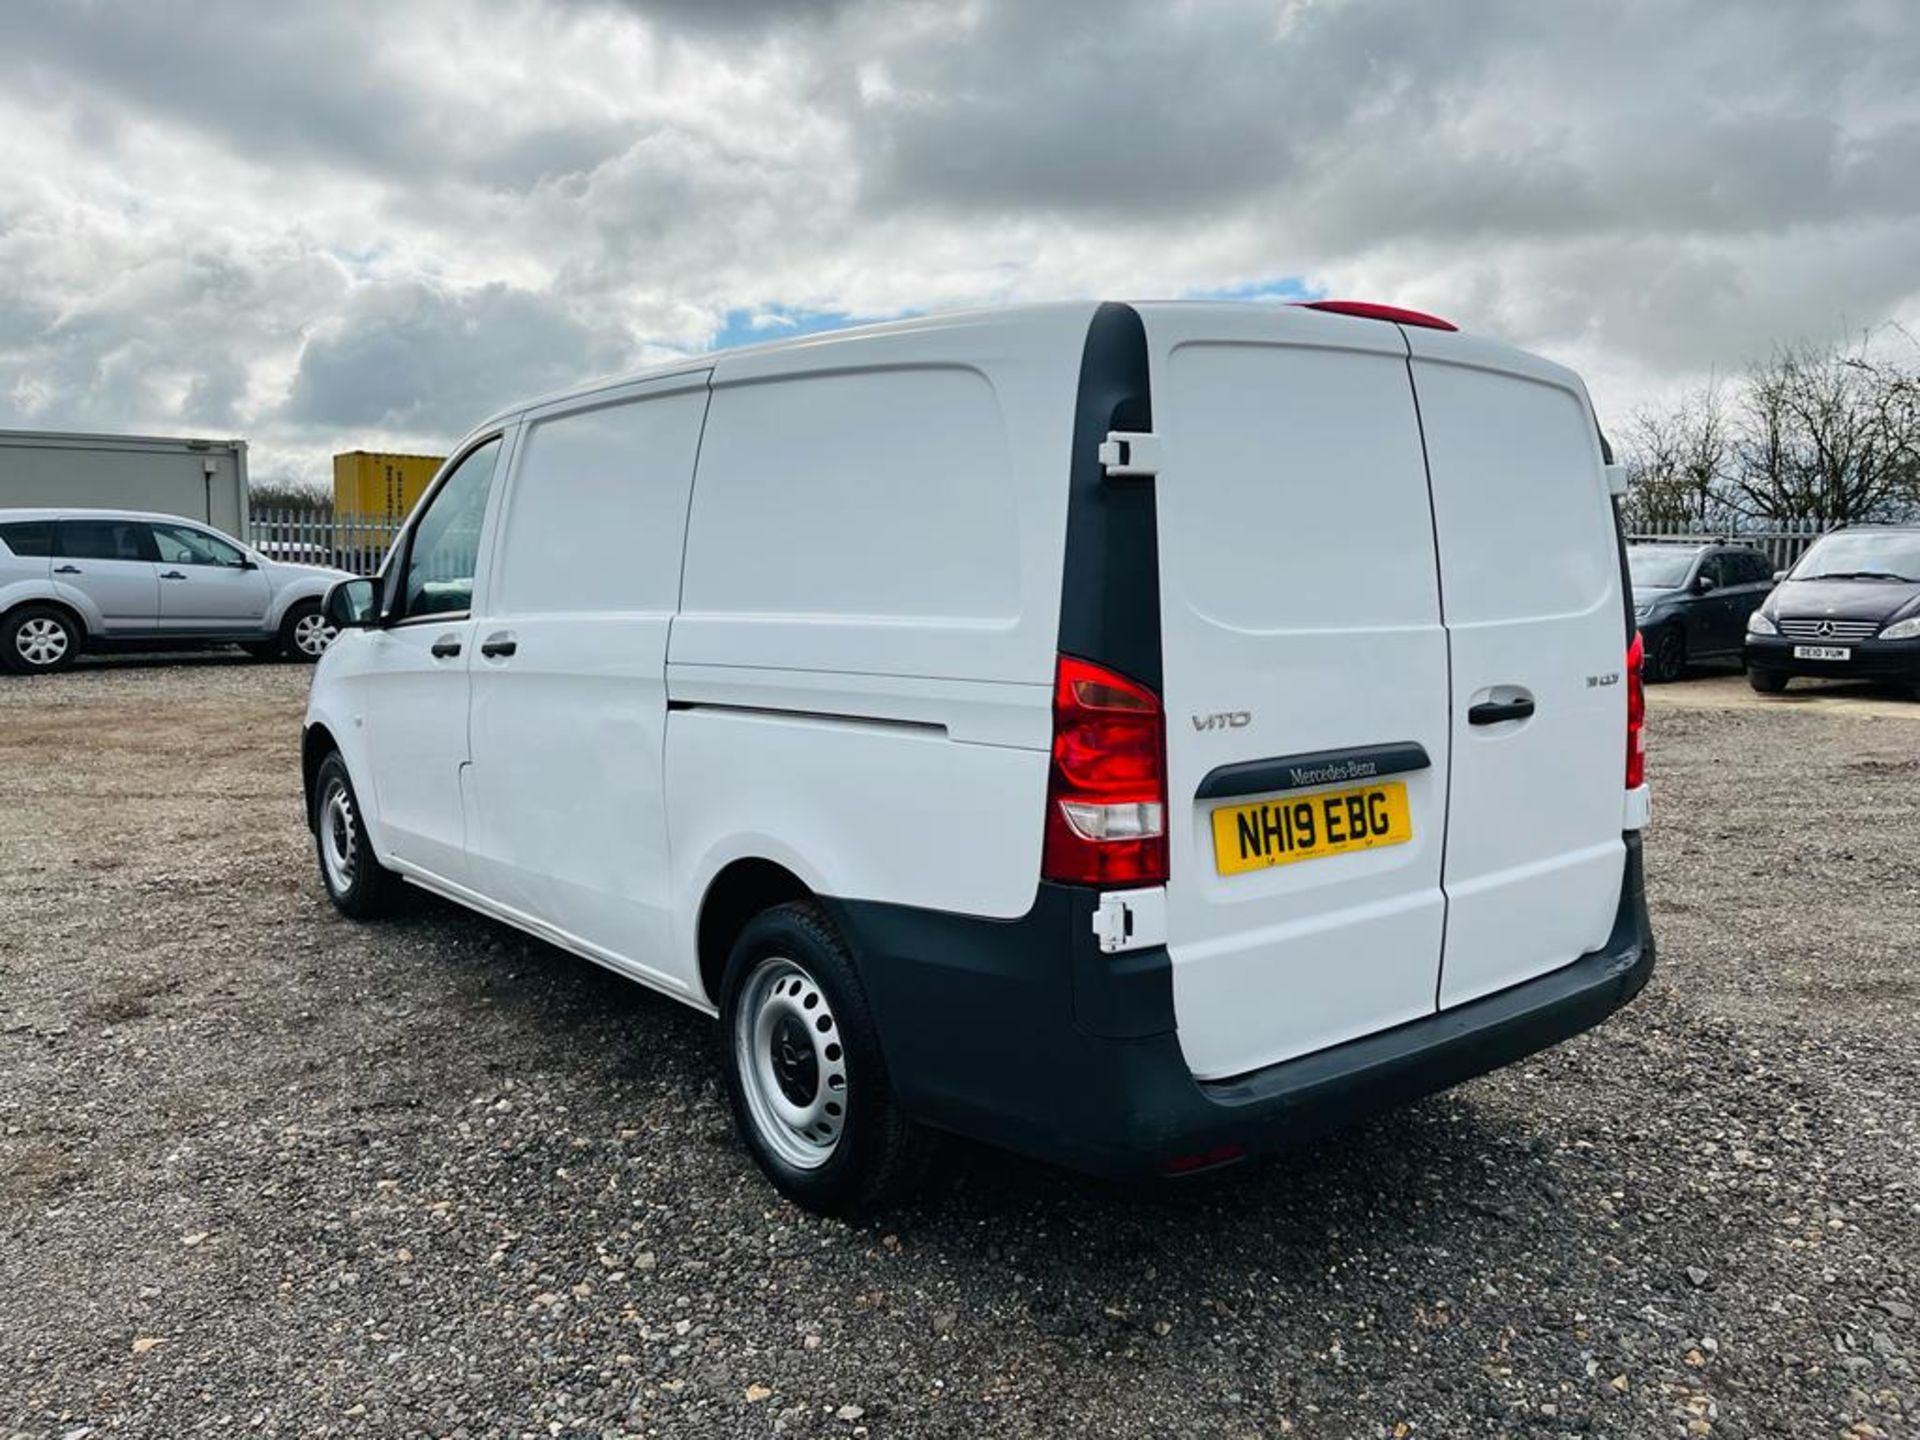 Mercedes Benz Vito 1.6 111 CDI FWD 2019 '19 Reg' - ULEZ Compliant - Only 85,733 Miles - Image 6 of 24